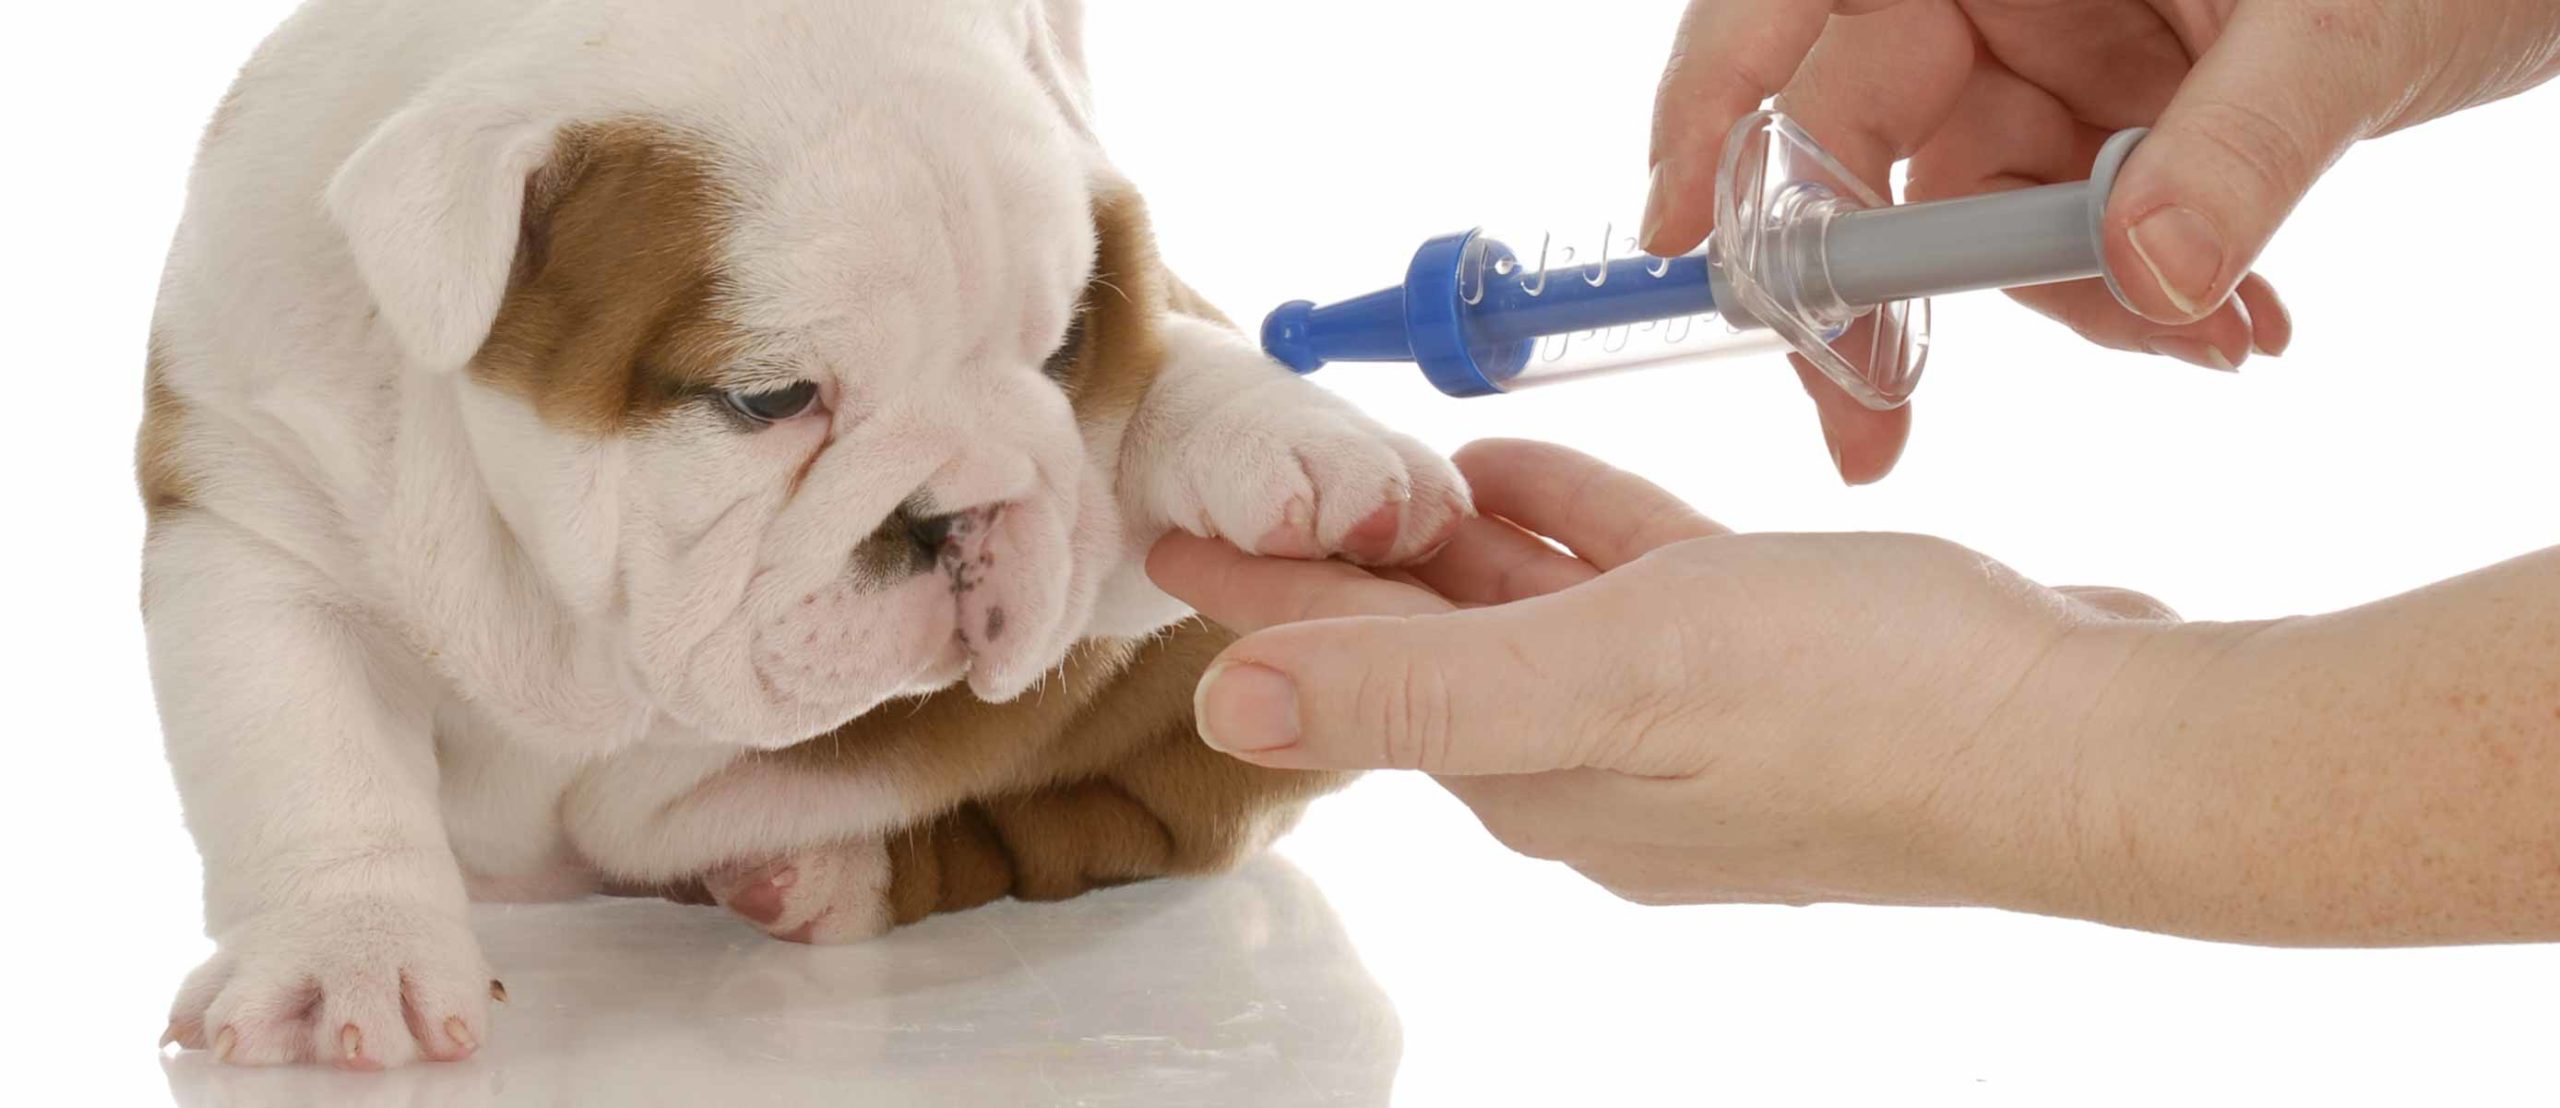 when should puppies have their shots